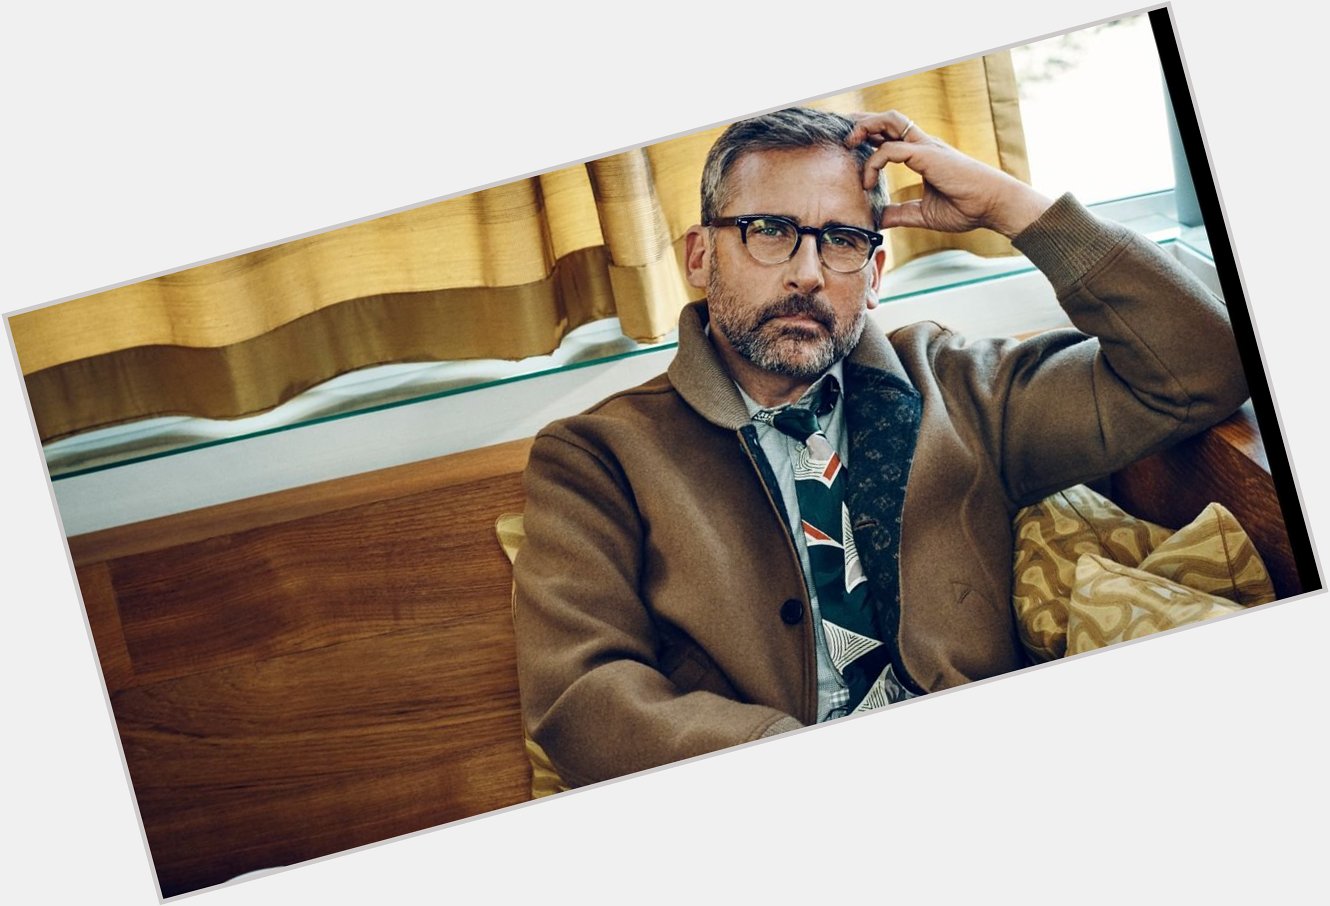 Happy birthday to this silver fox. 

I need more magazine photo shoots of Steve Carell. 